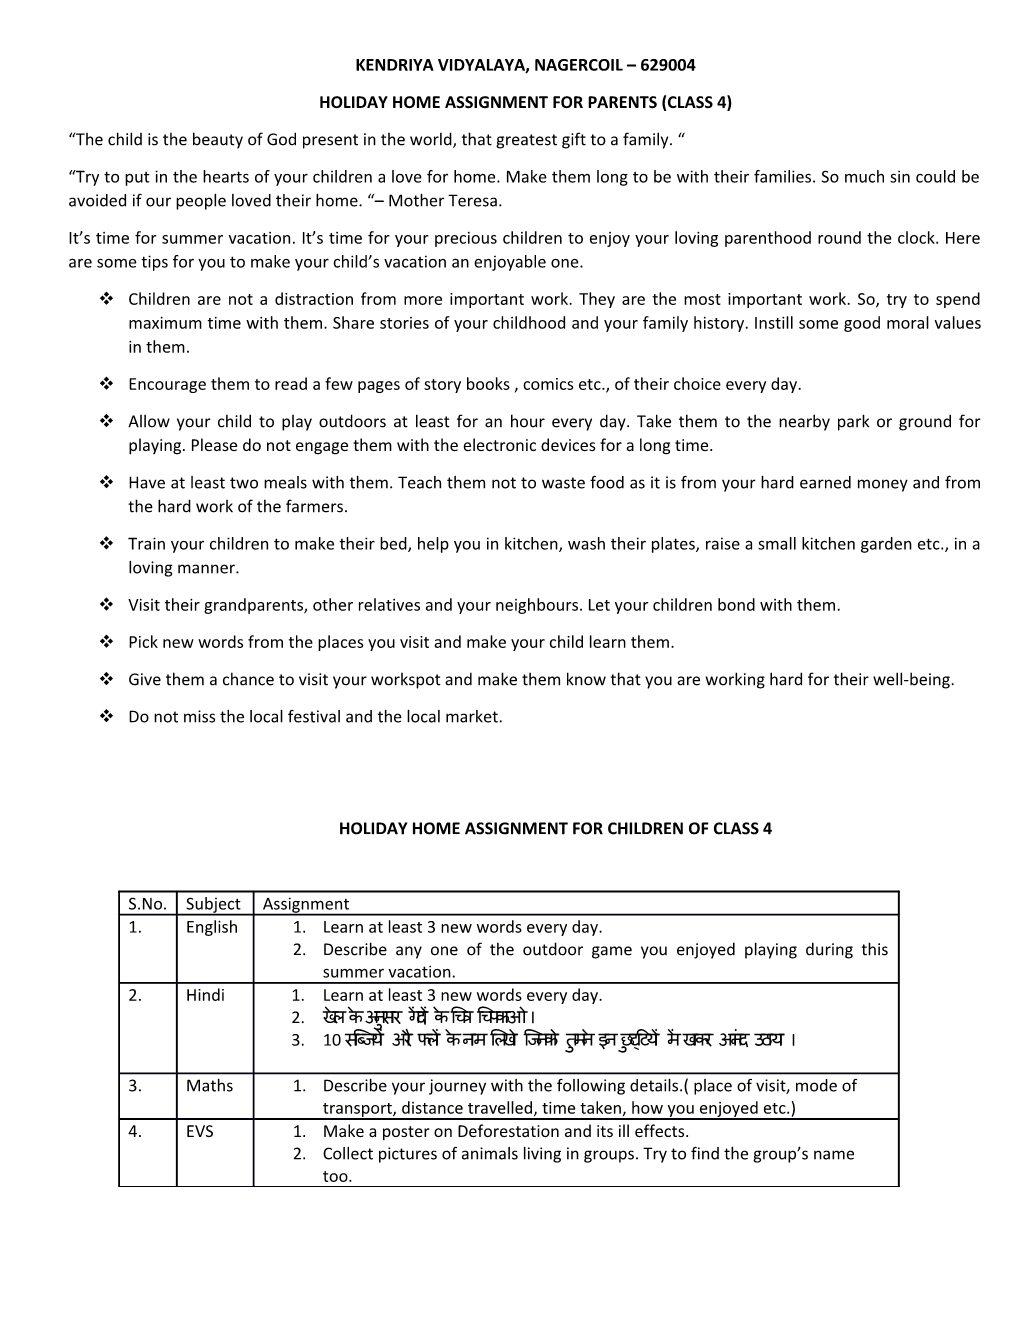 Holiday Home Assignment for Parents (Class 4)